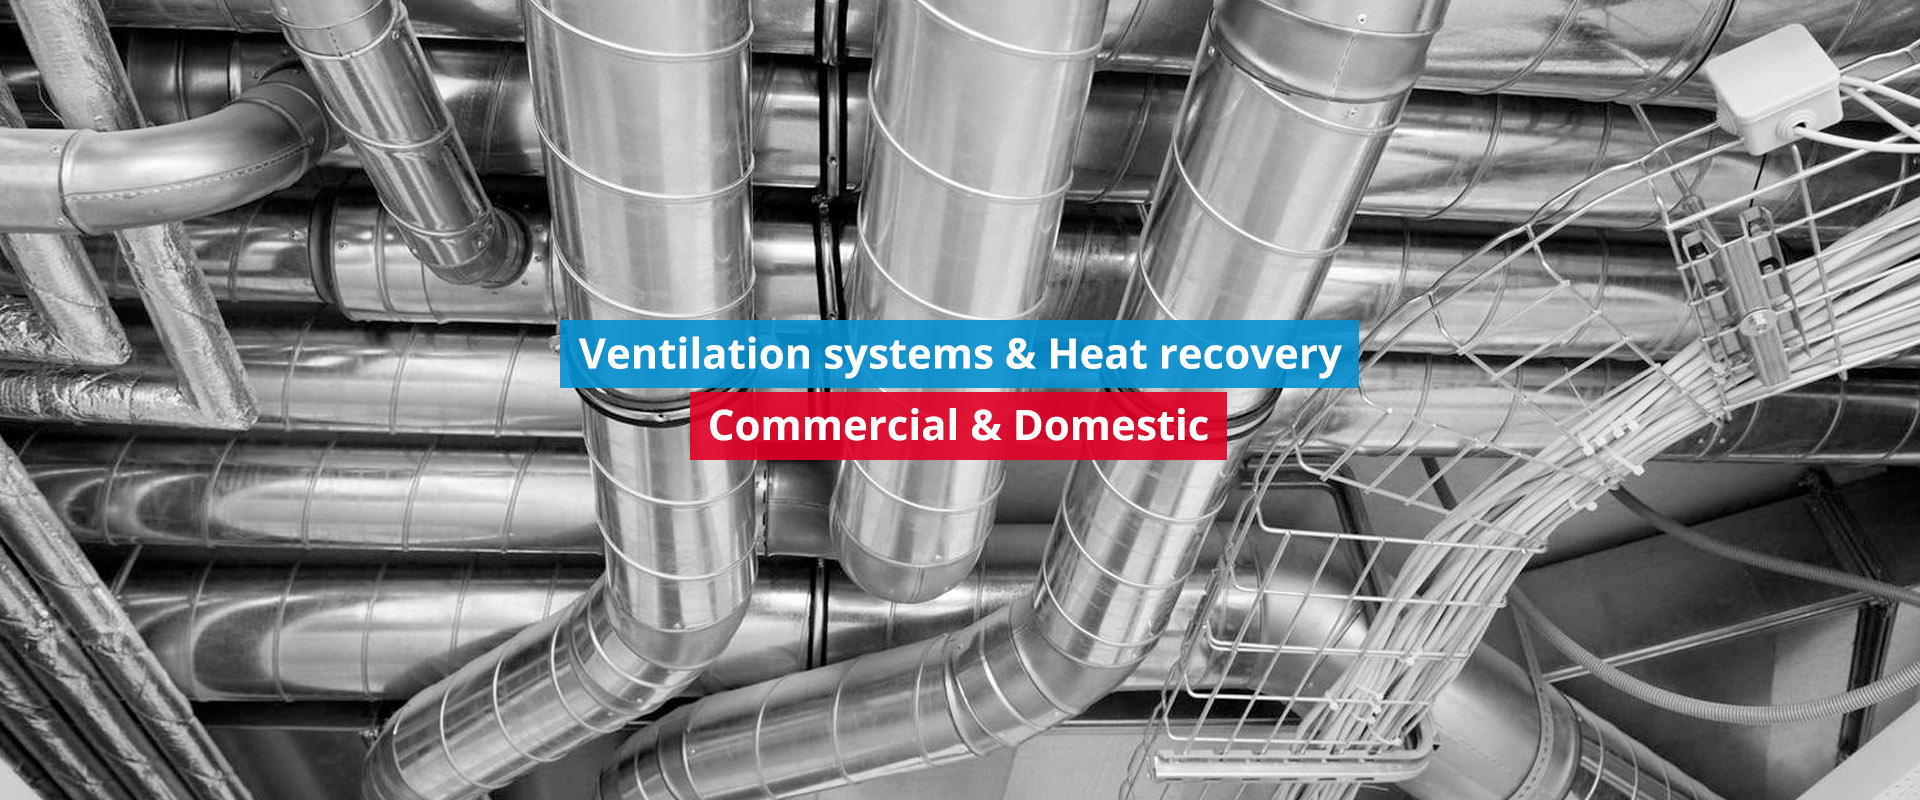 ventilation systems and heat recovery